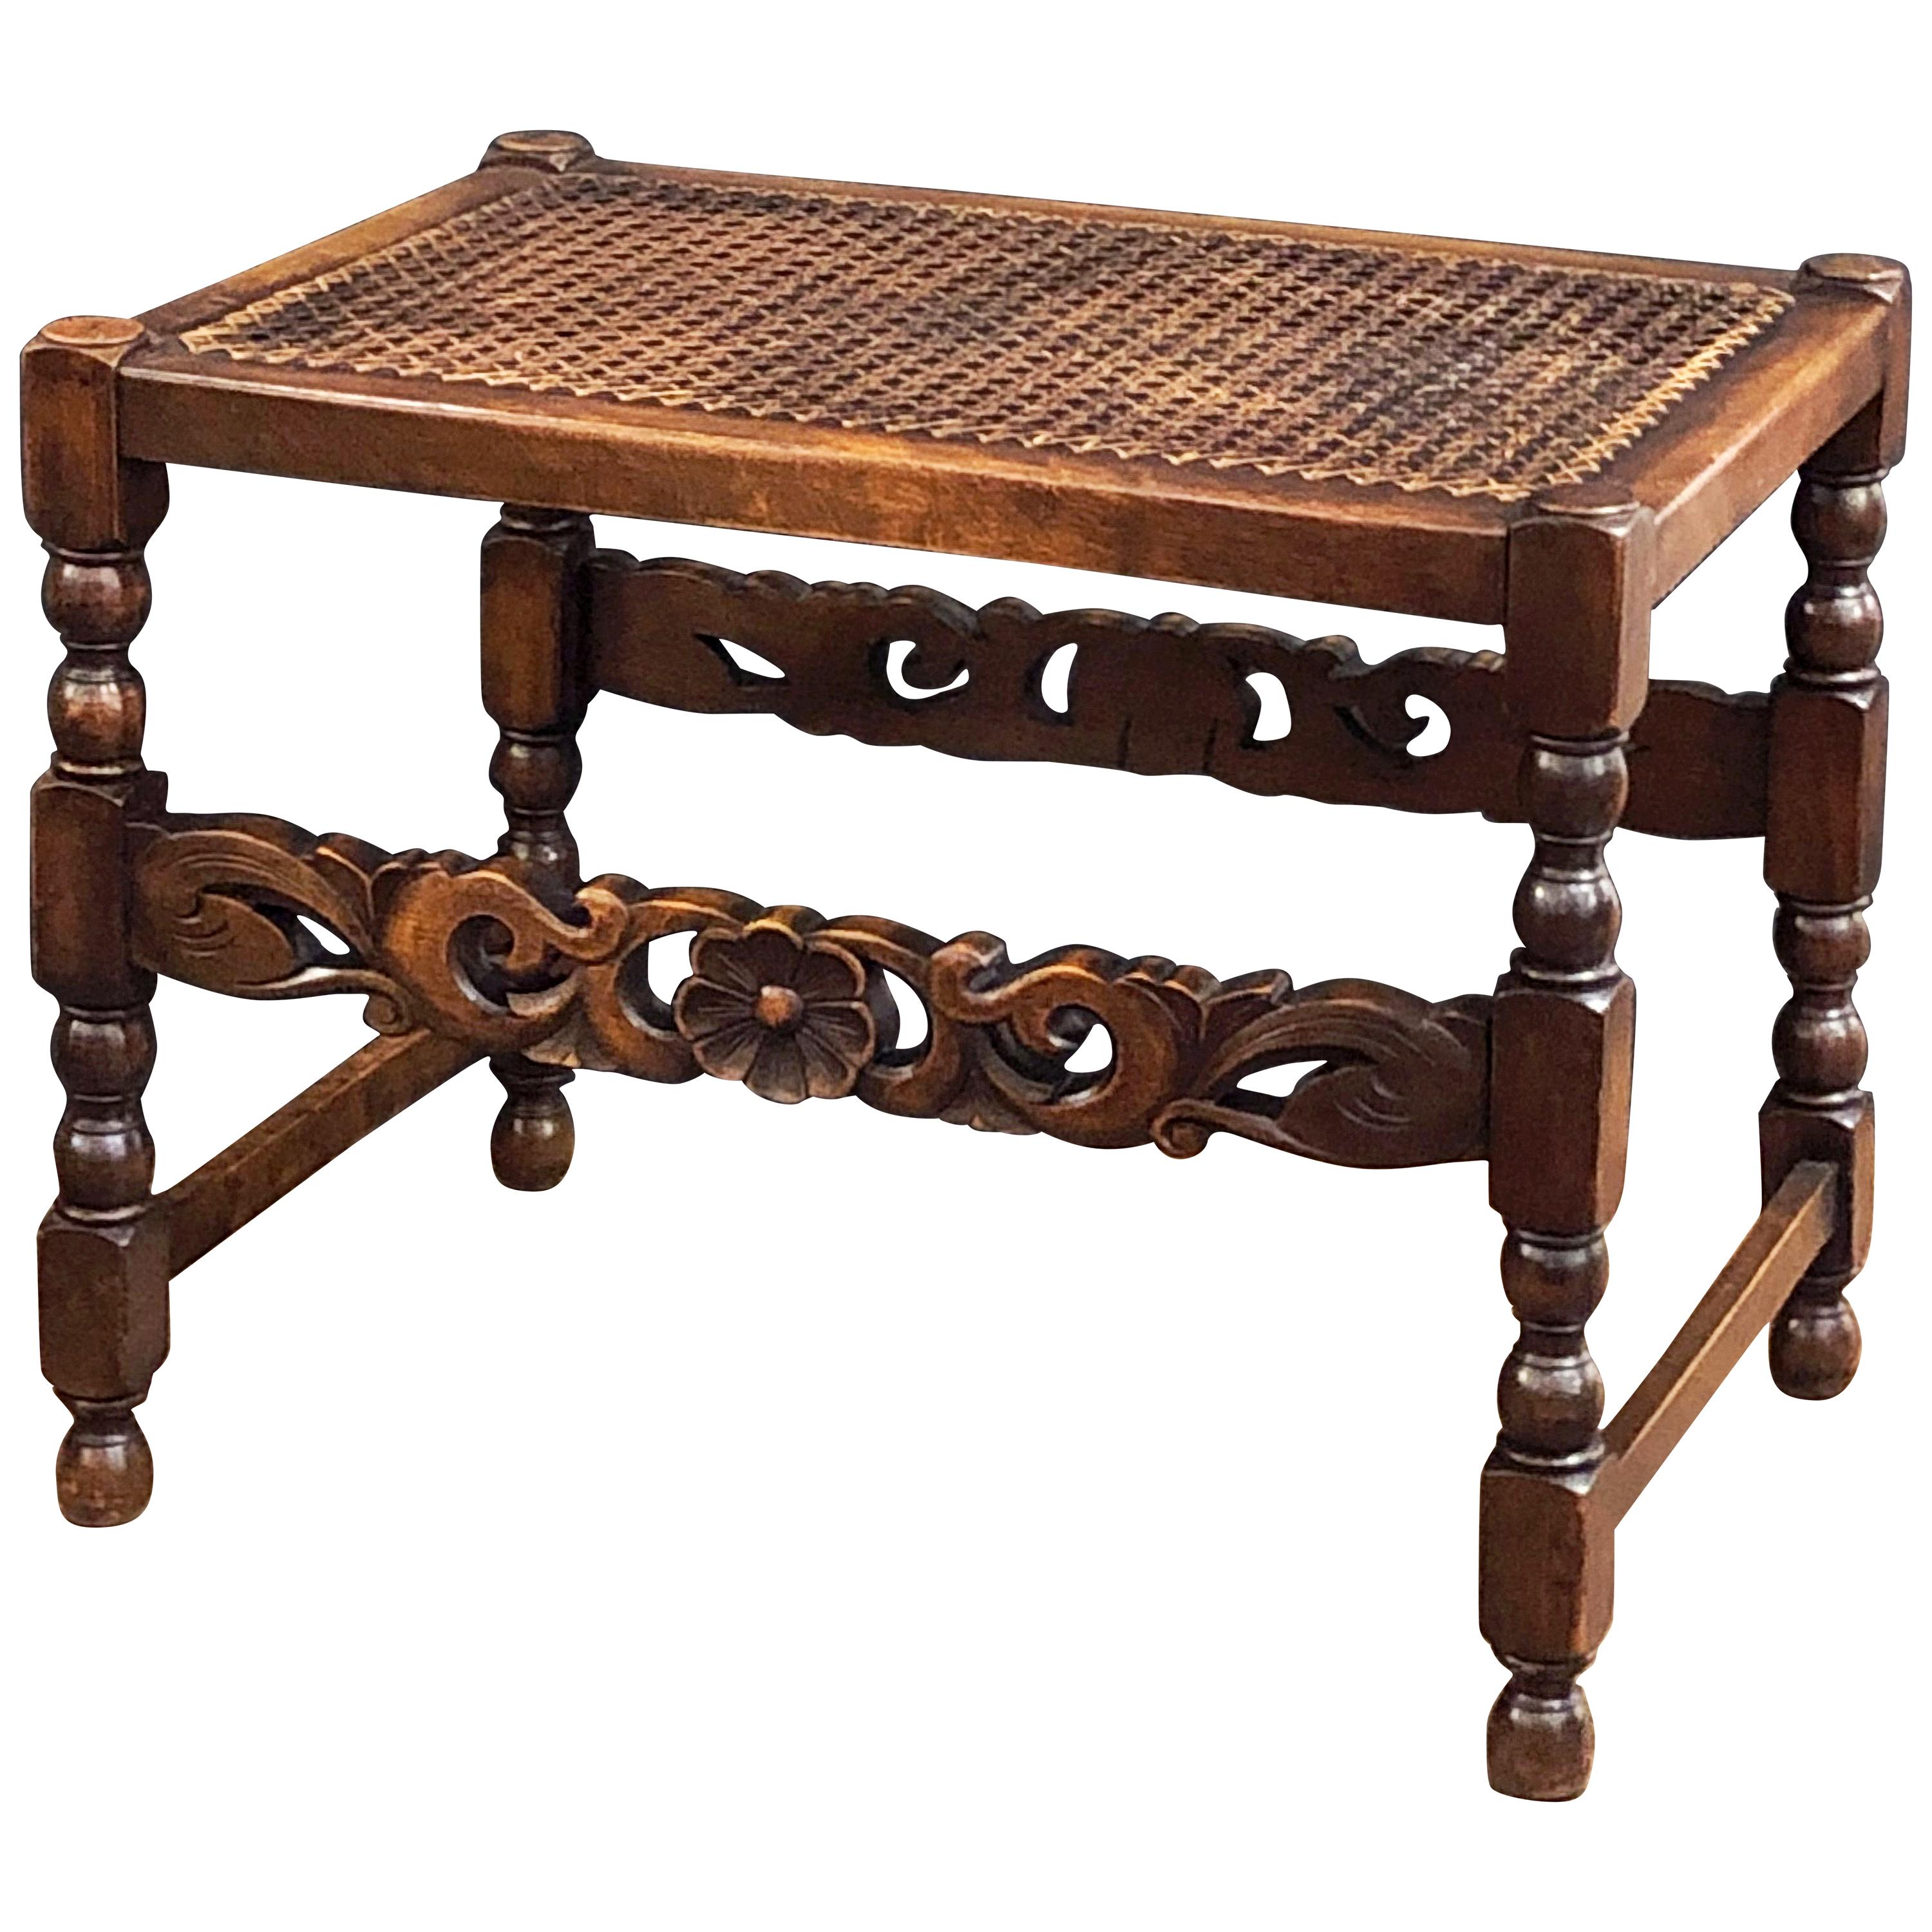 English Caned Bergere Seat or Bench with Carved Wood Stretcher